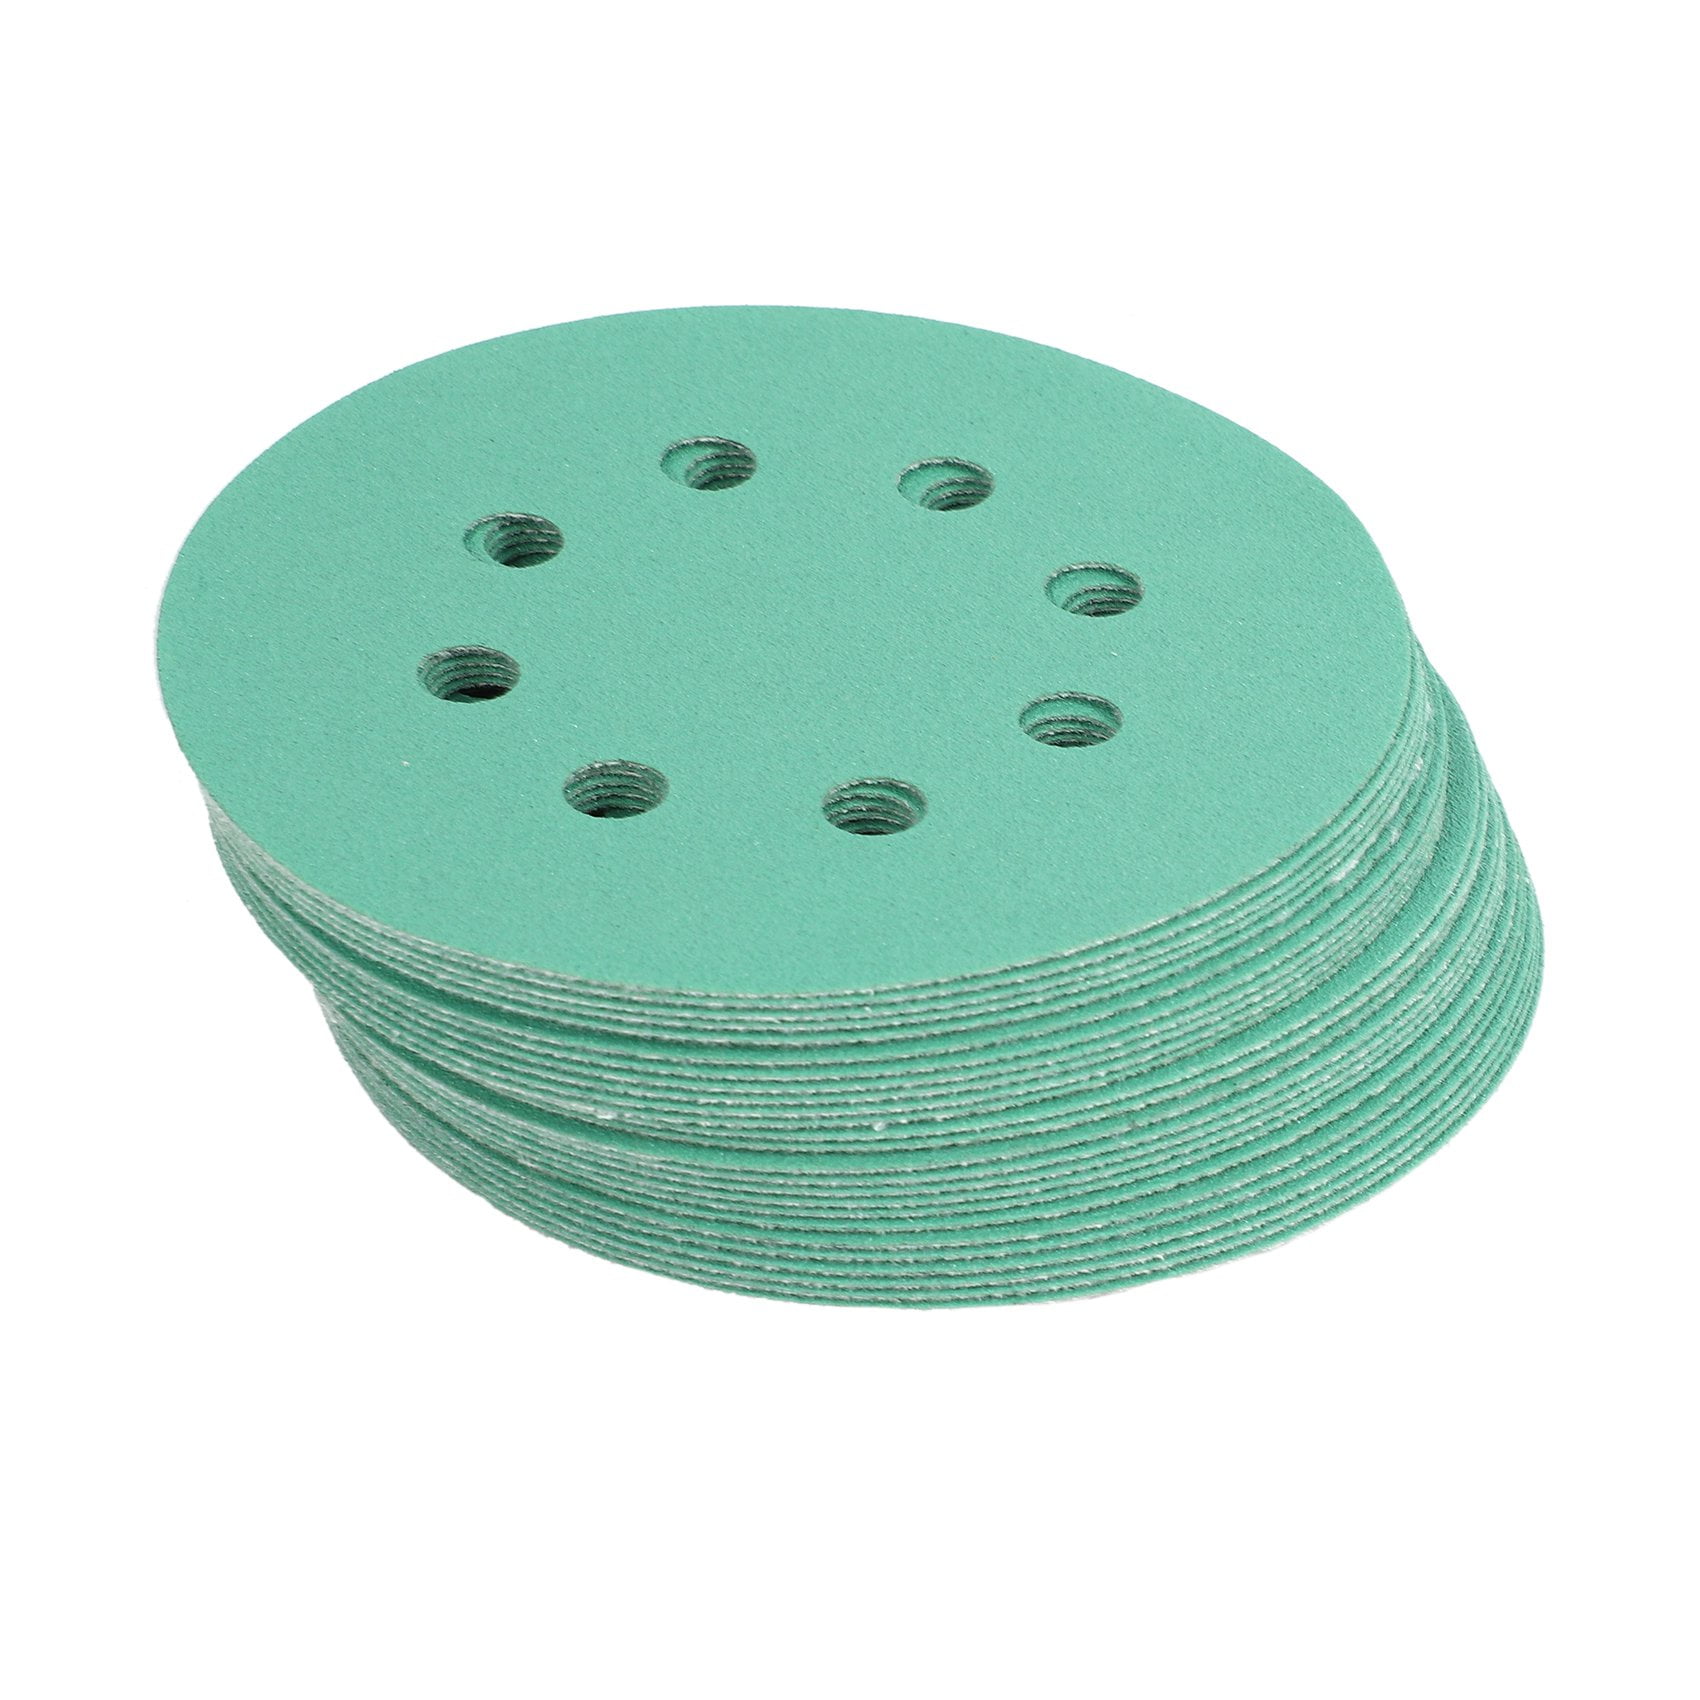 125mm Wet and Dry Sanding Discs 5'' Sandpaper 8 Hole Film Pads // 40-3000 GRIT 